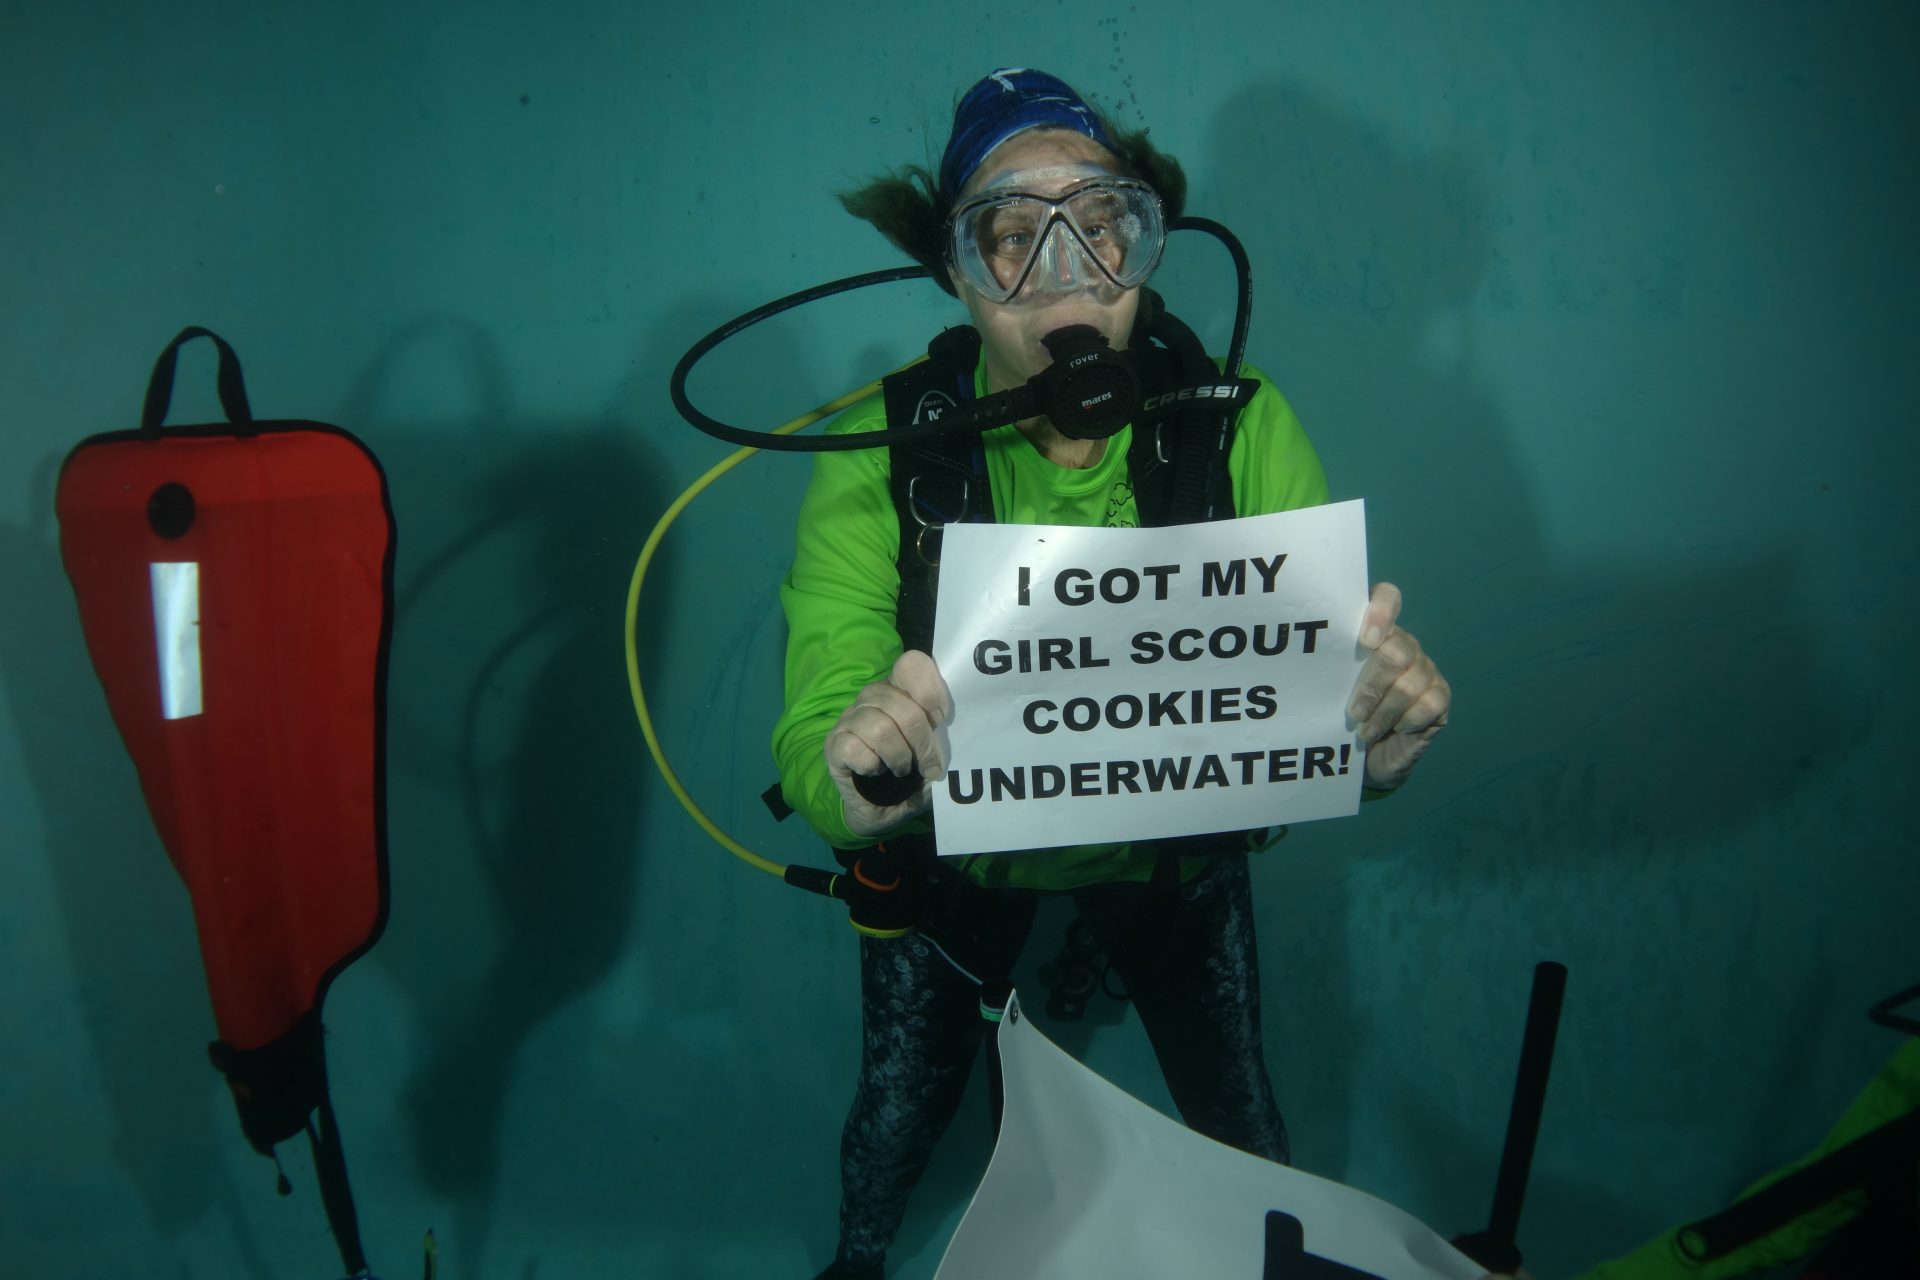 Cookie customer holds up "I got my Girl Scout Cookies underwater!" sign underwater.